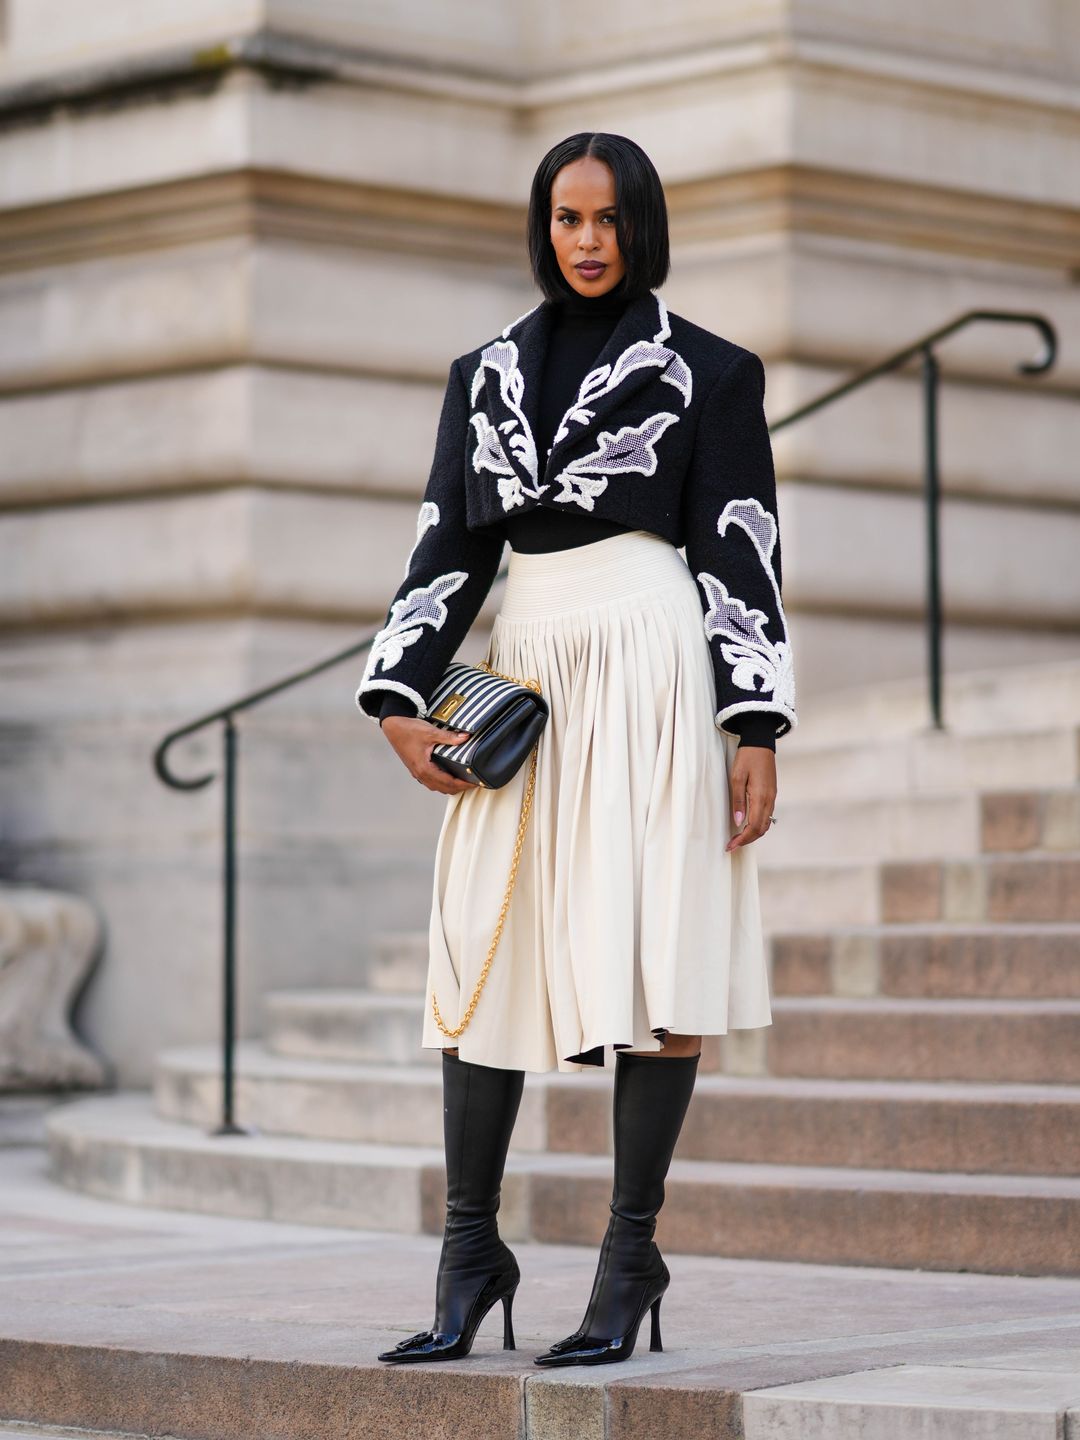 Sabrina Elba wearing a black embroidered jacked with a cream pleated skirt 